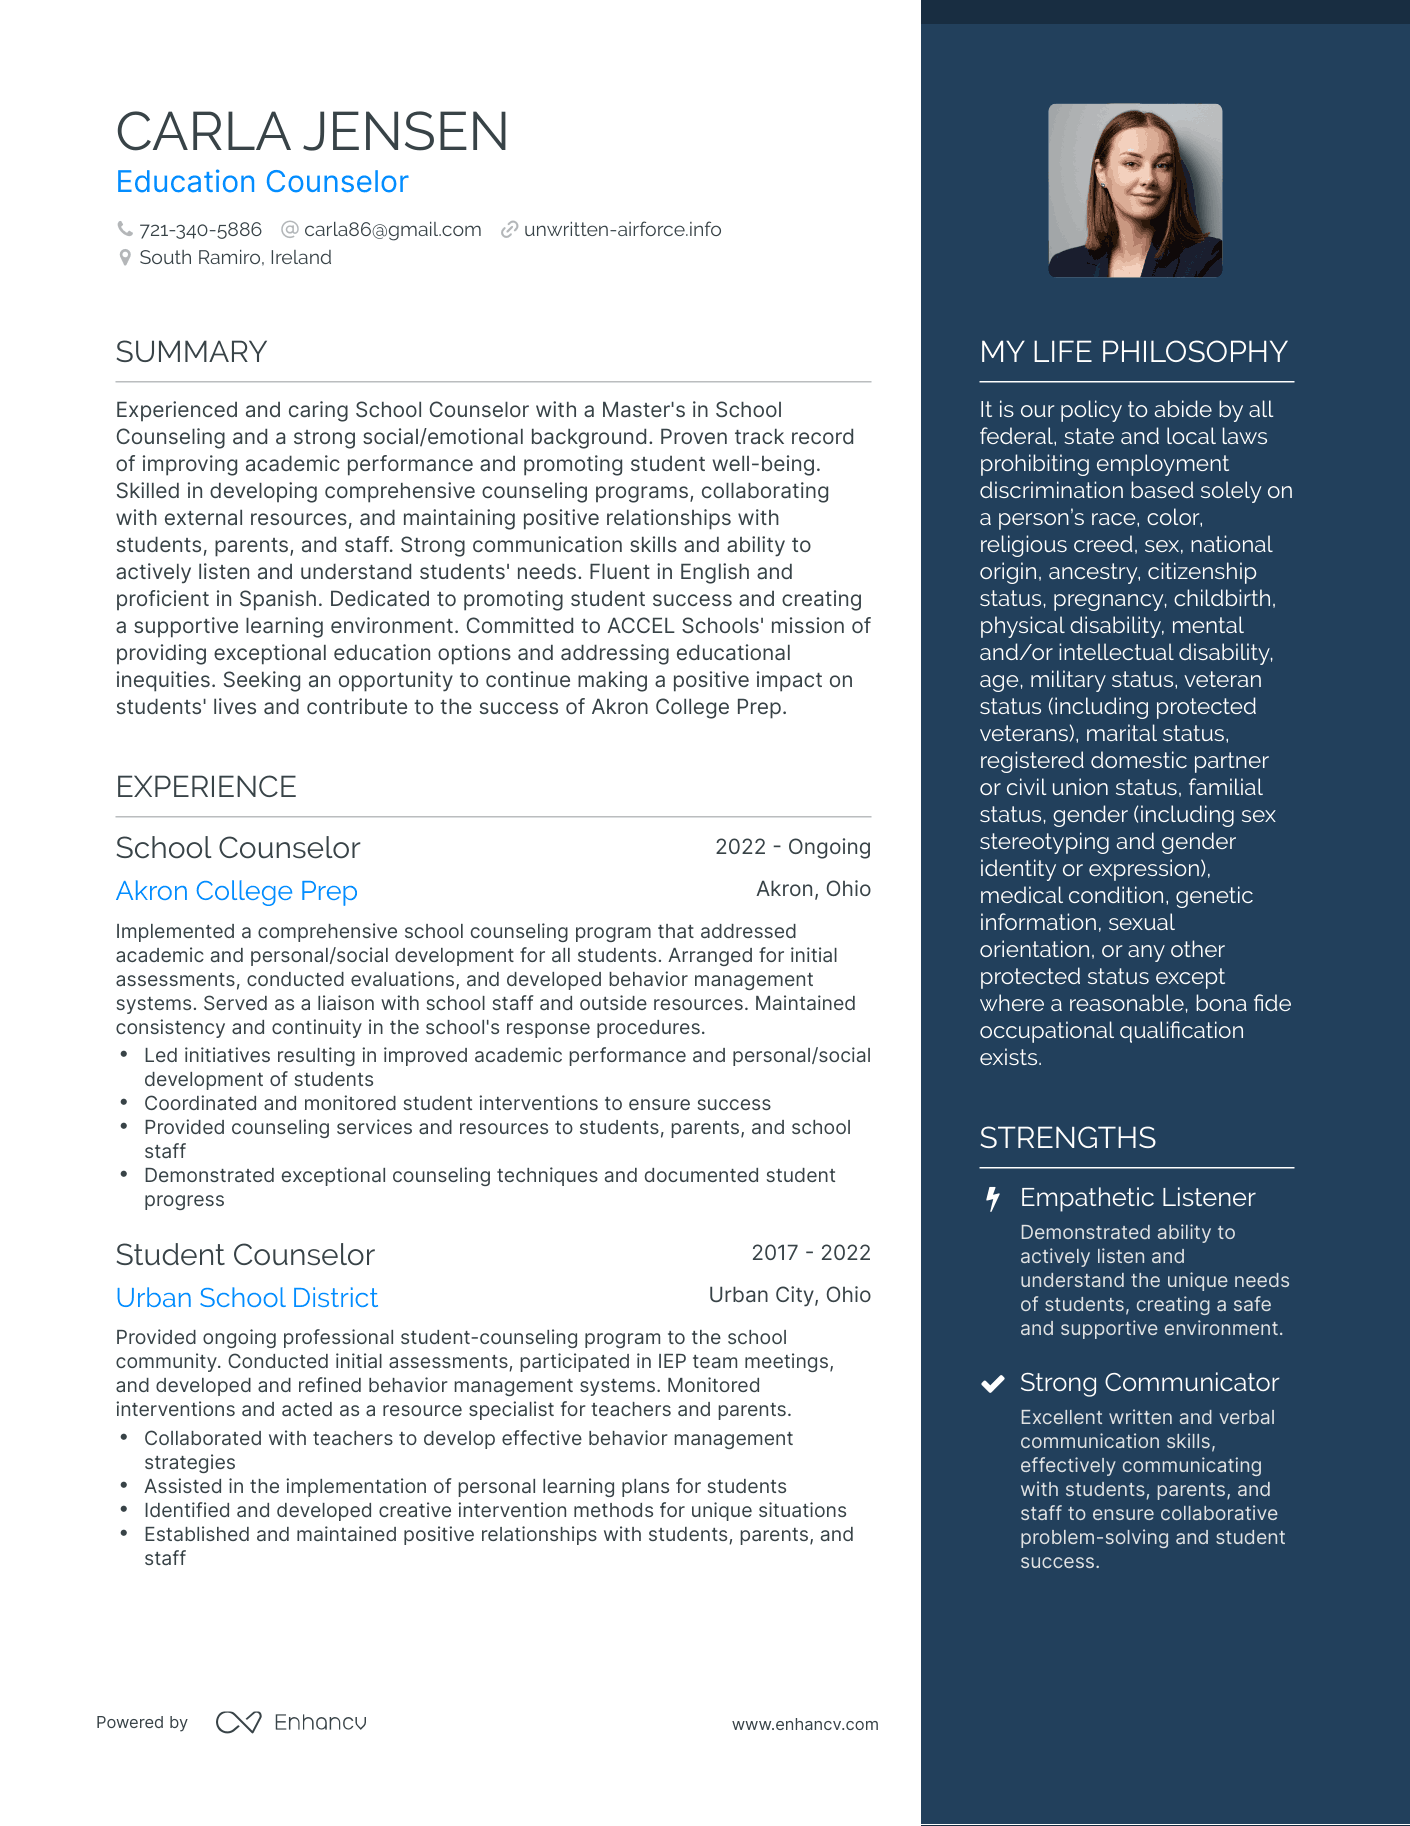 Education Counselor resume example